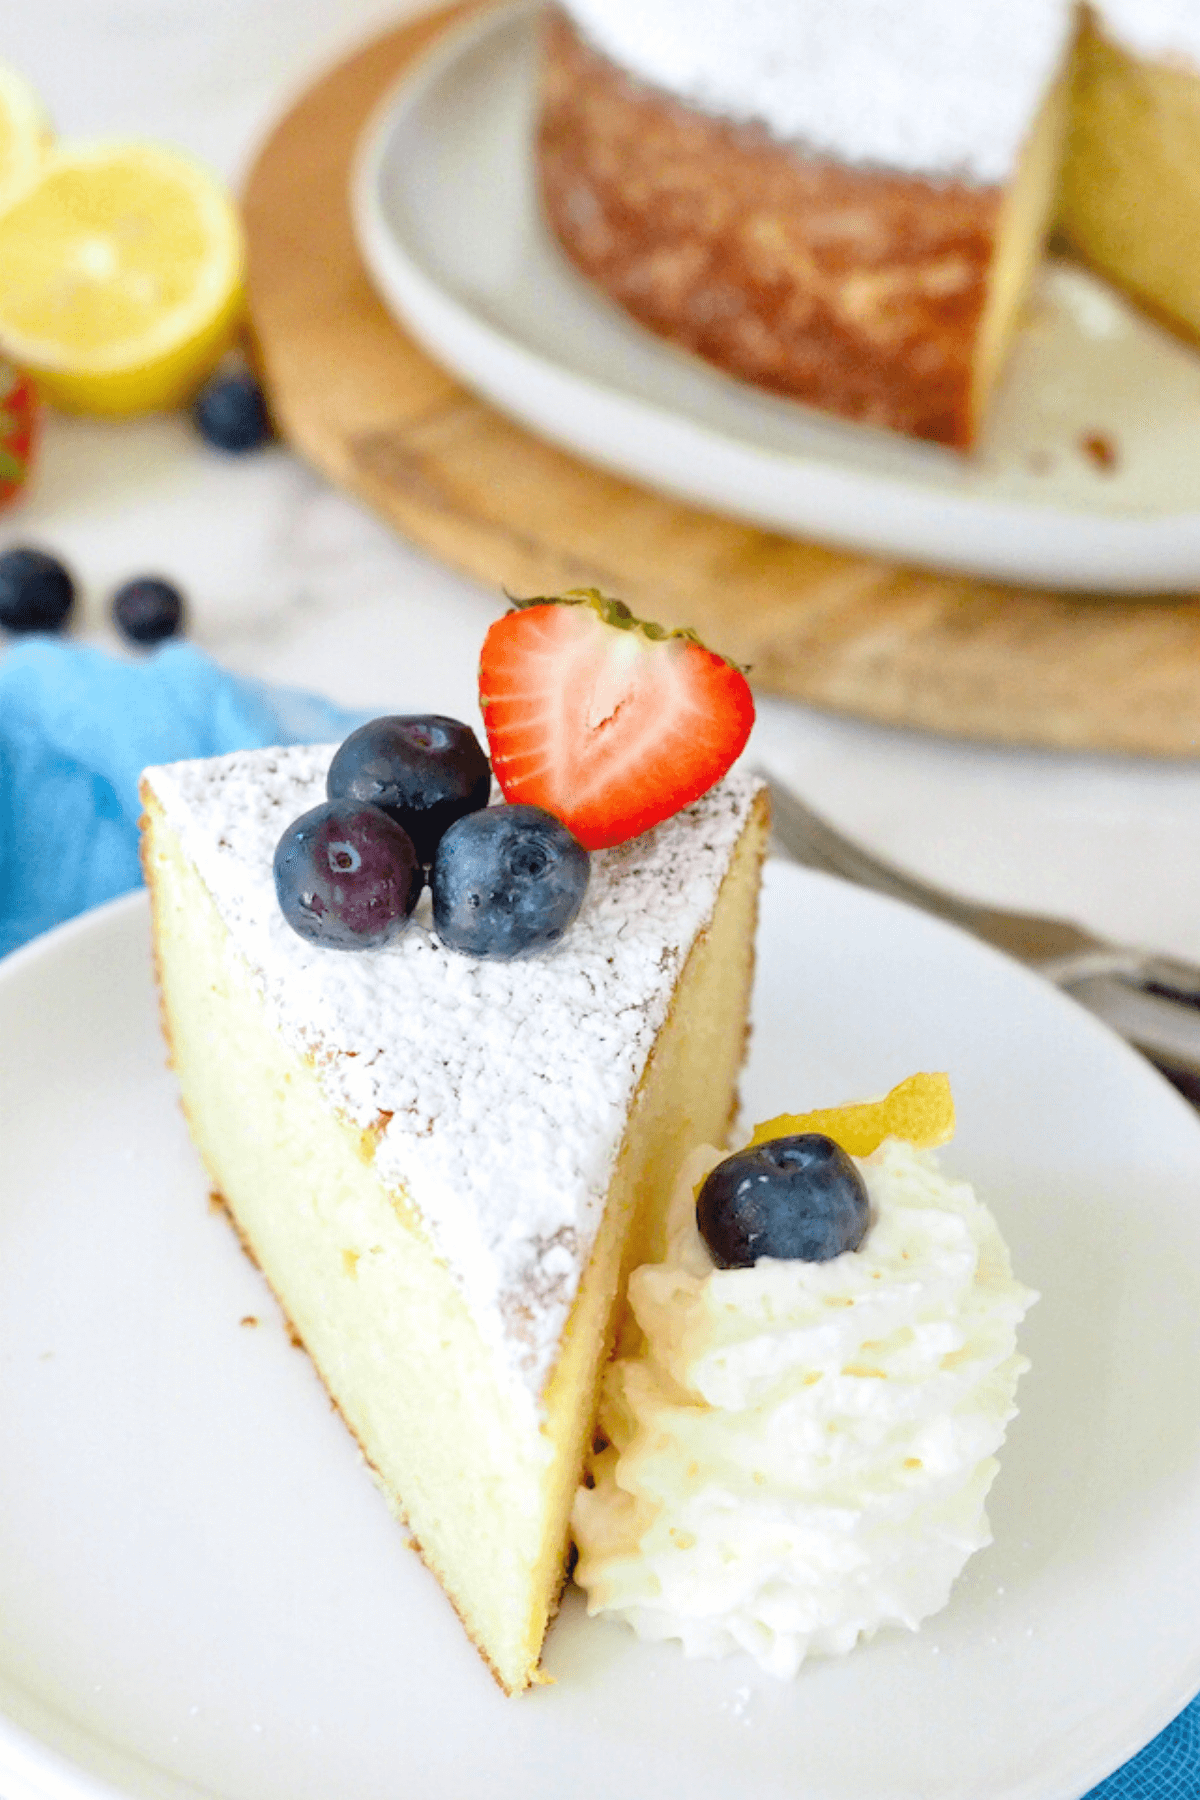 Slice of lemon ricotta cake on plate with whole cake in background, slice is topped with blueberries and strawberries along with a dollop of whipped cream.